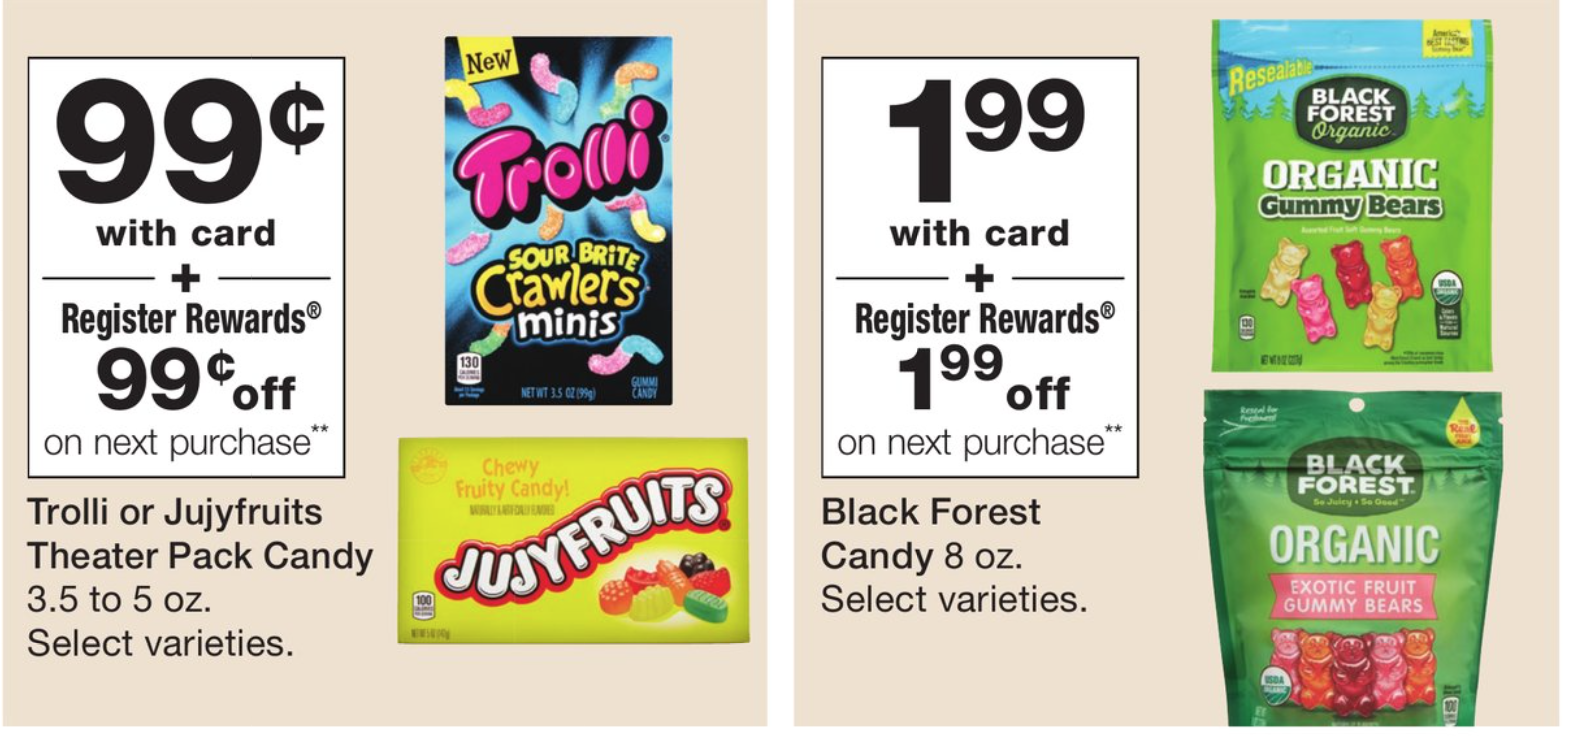 Sneak Peek Walgreens Free Trolli Or Jujyfruits Theater Pack Candy And Black Forest Gummy Candies Starting Sunday 6 24 Dapper Deals